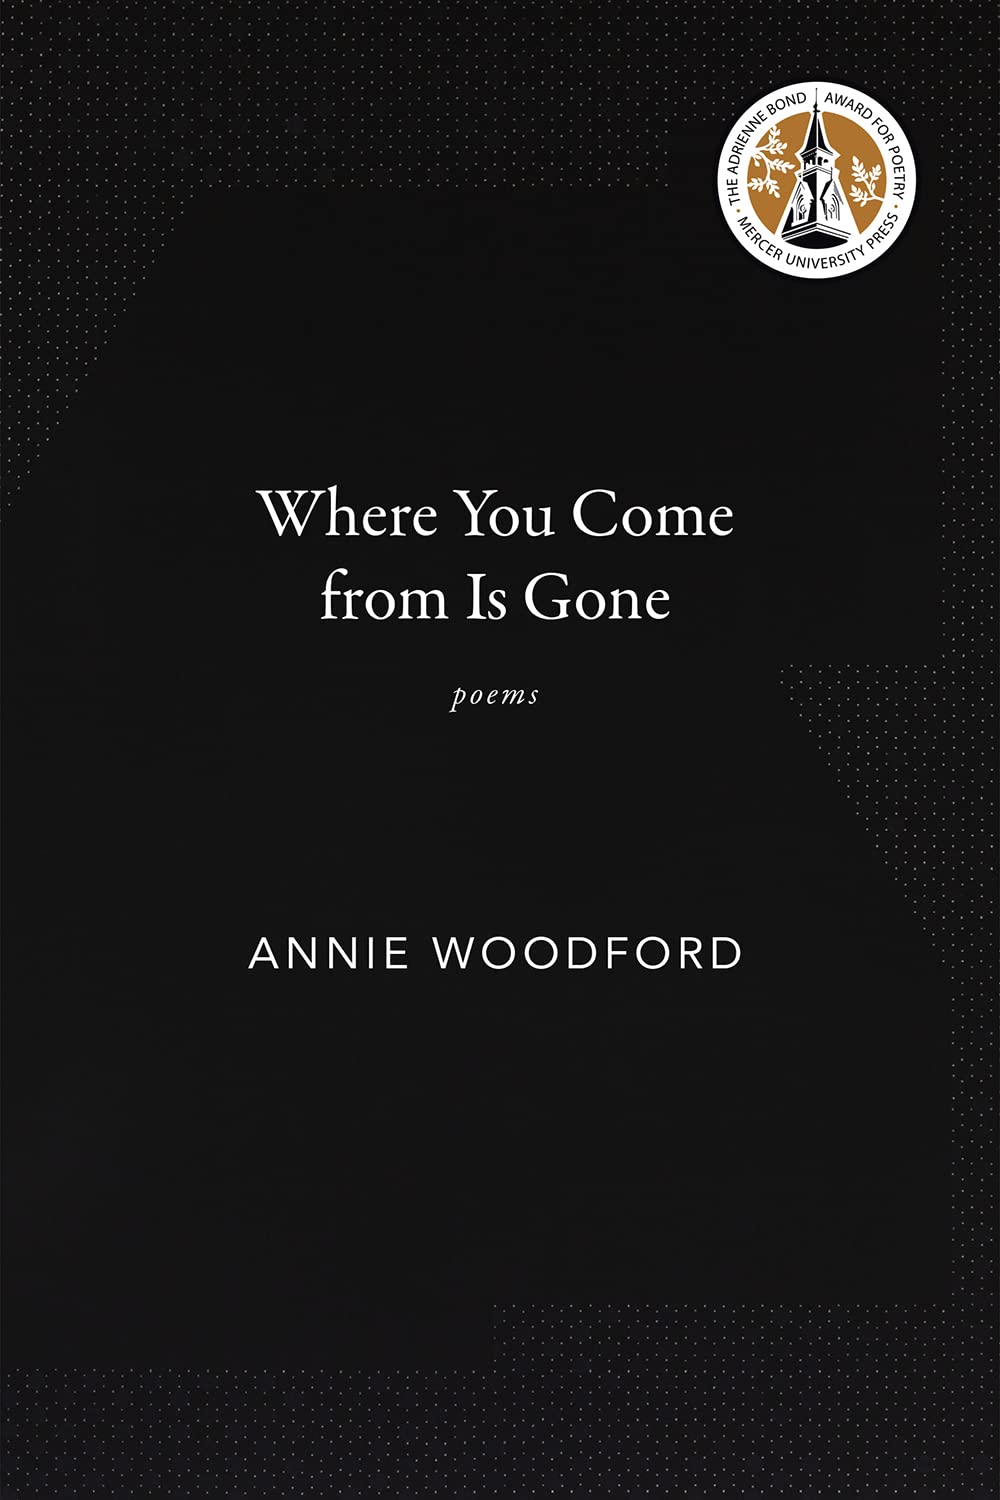 Where You Come from Is Gone, by Annie Woodford